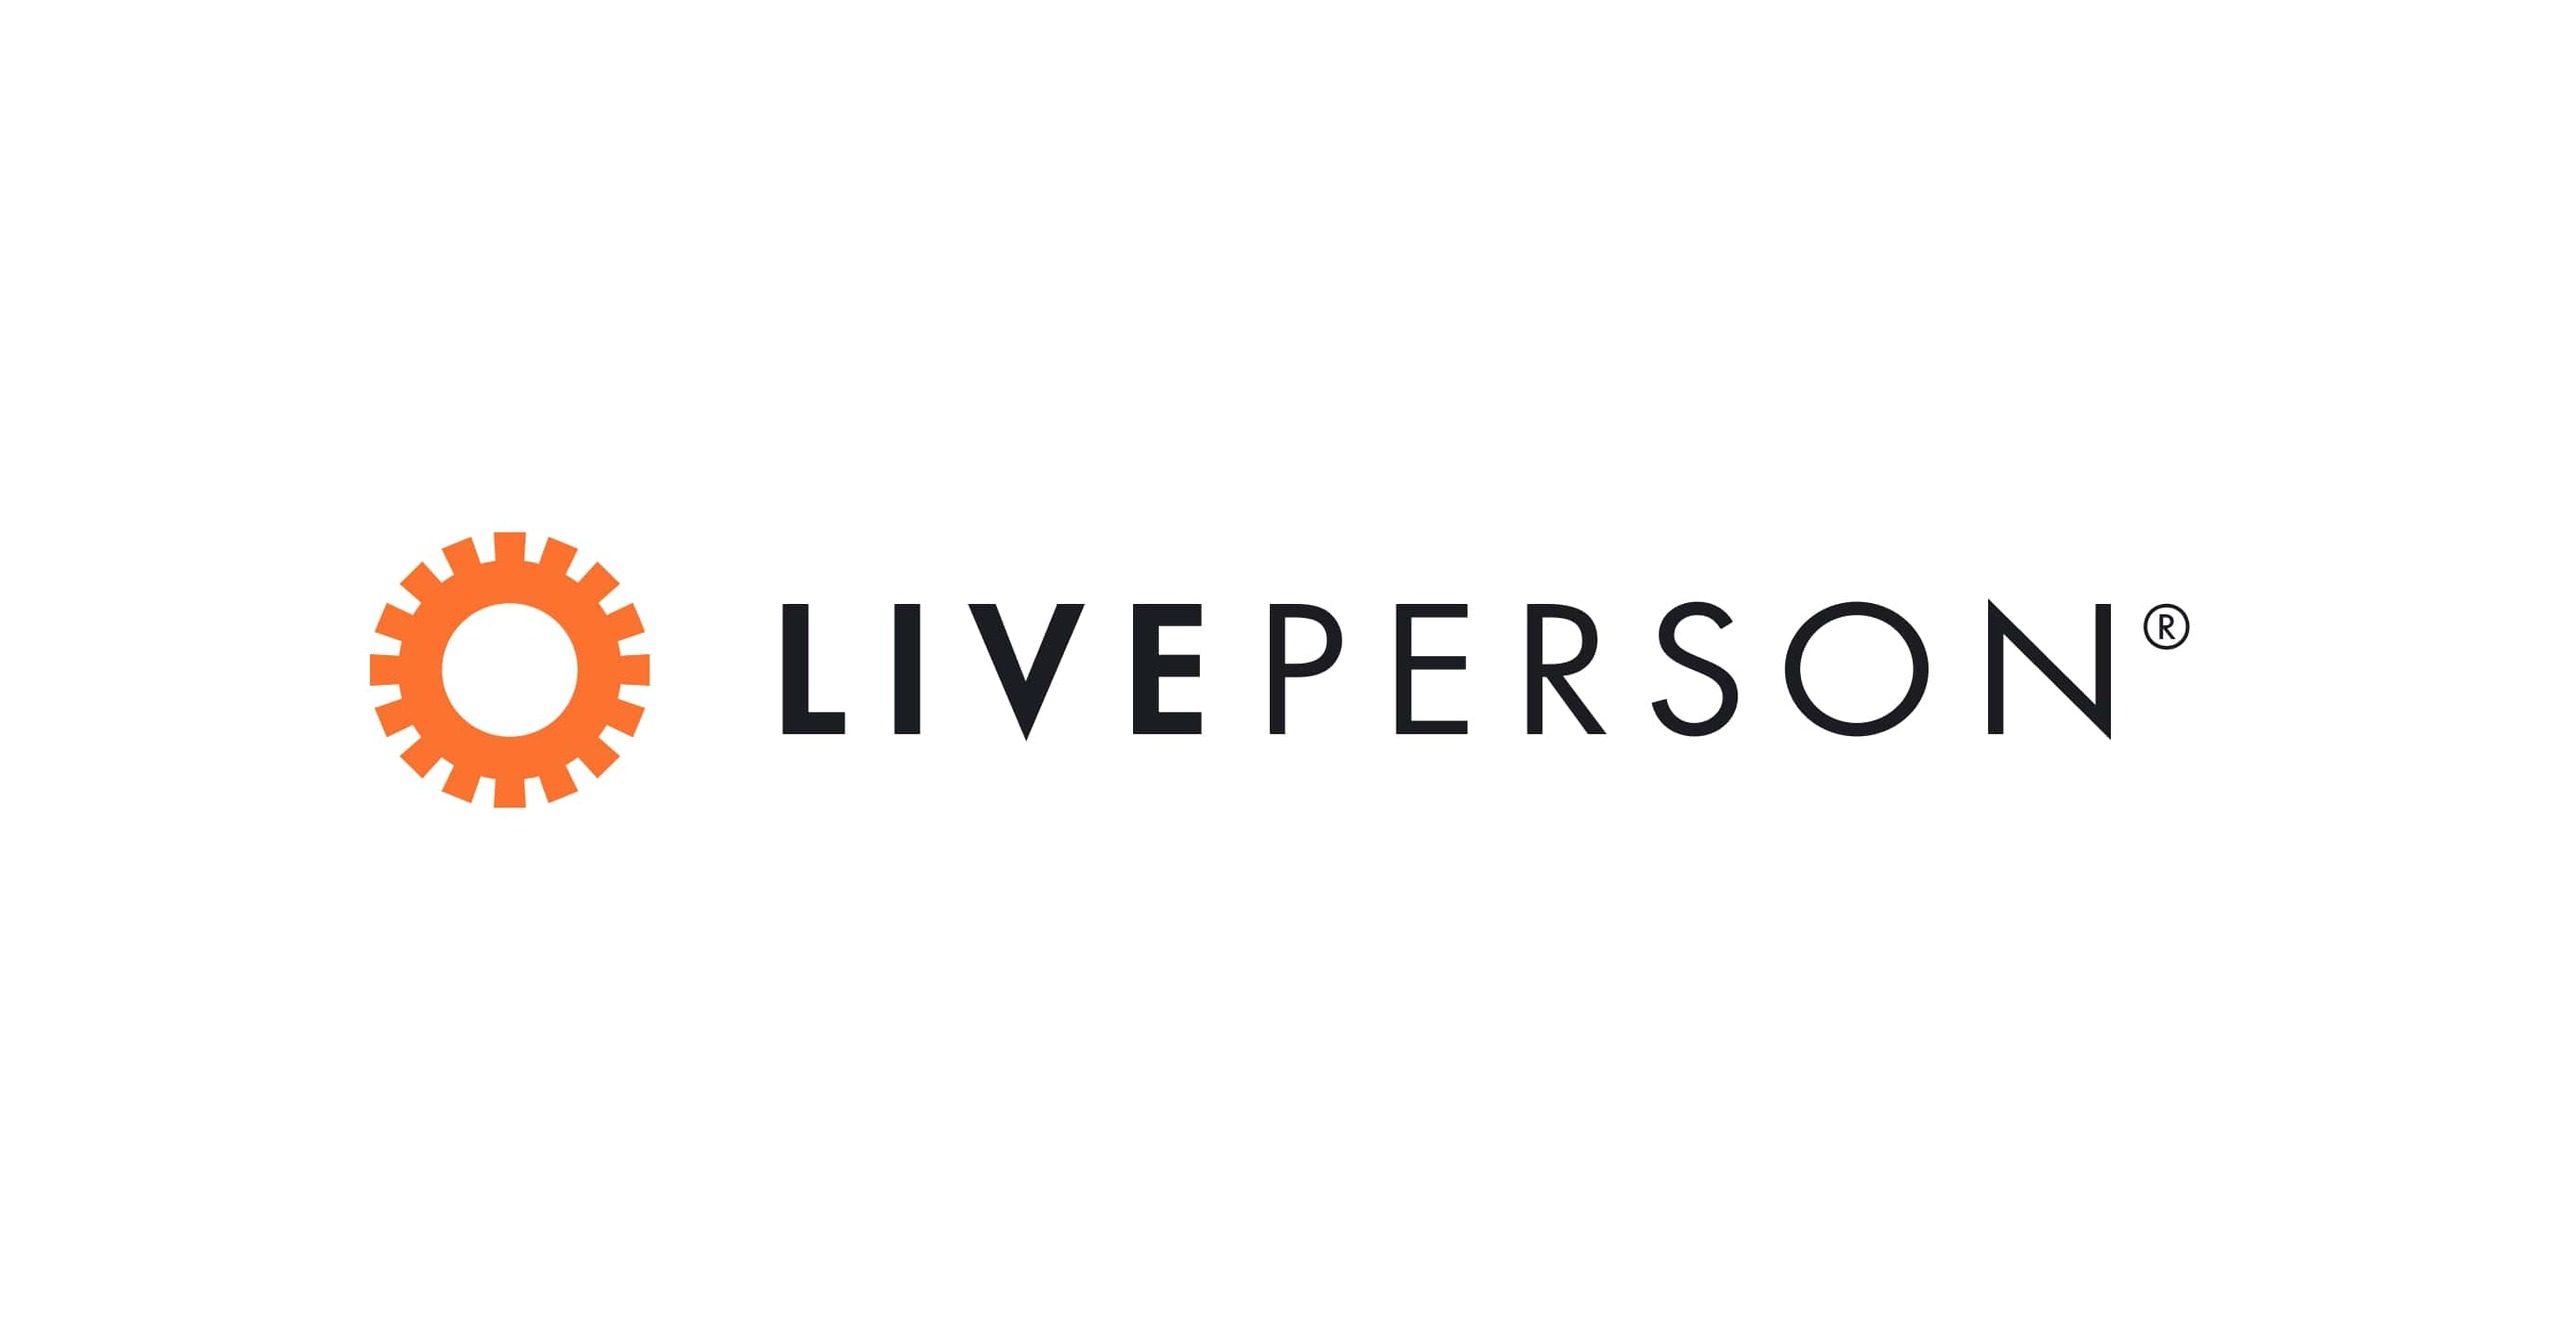 LivePerson and Medallia Announce Partnership to Make Experience Management Conversational